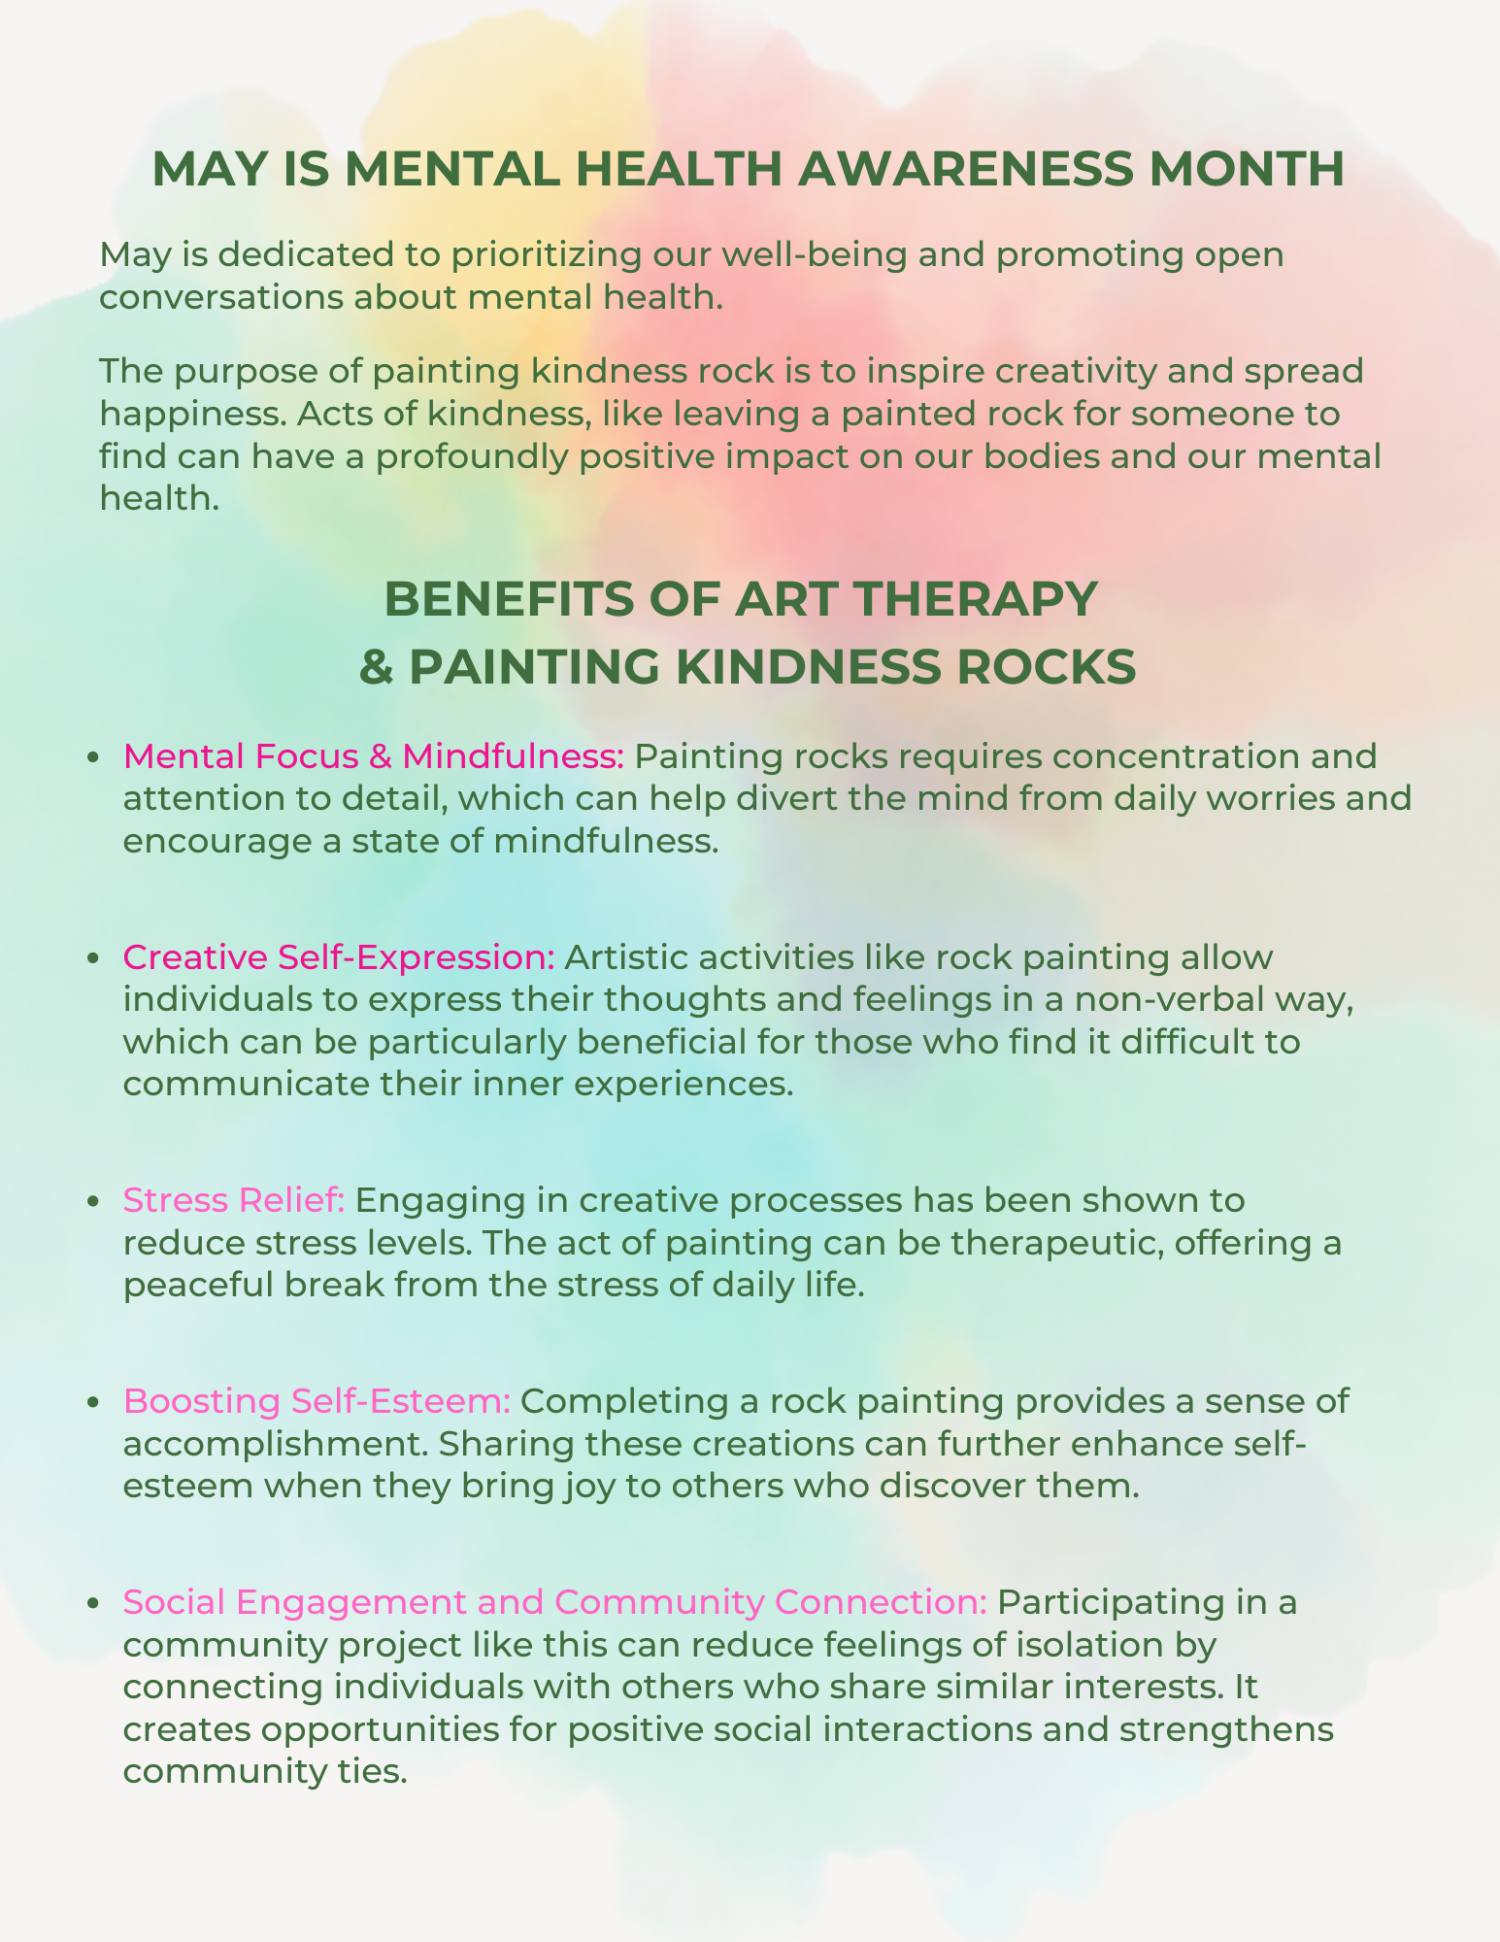 Mental Health Rocks Toolkit Page 2 benefits of art therapy & painting kindness rocks